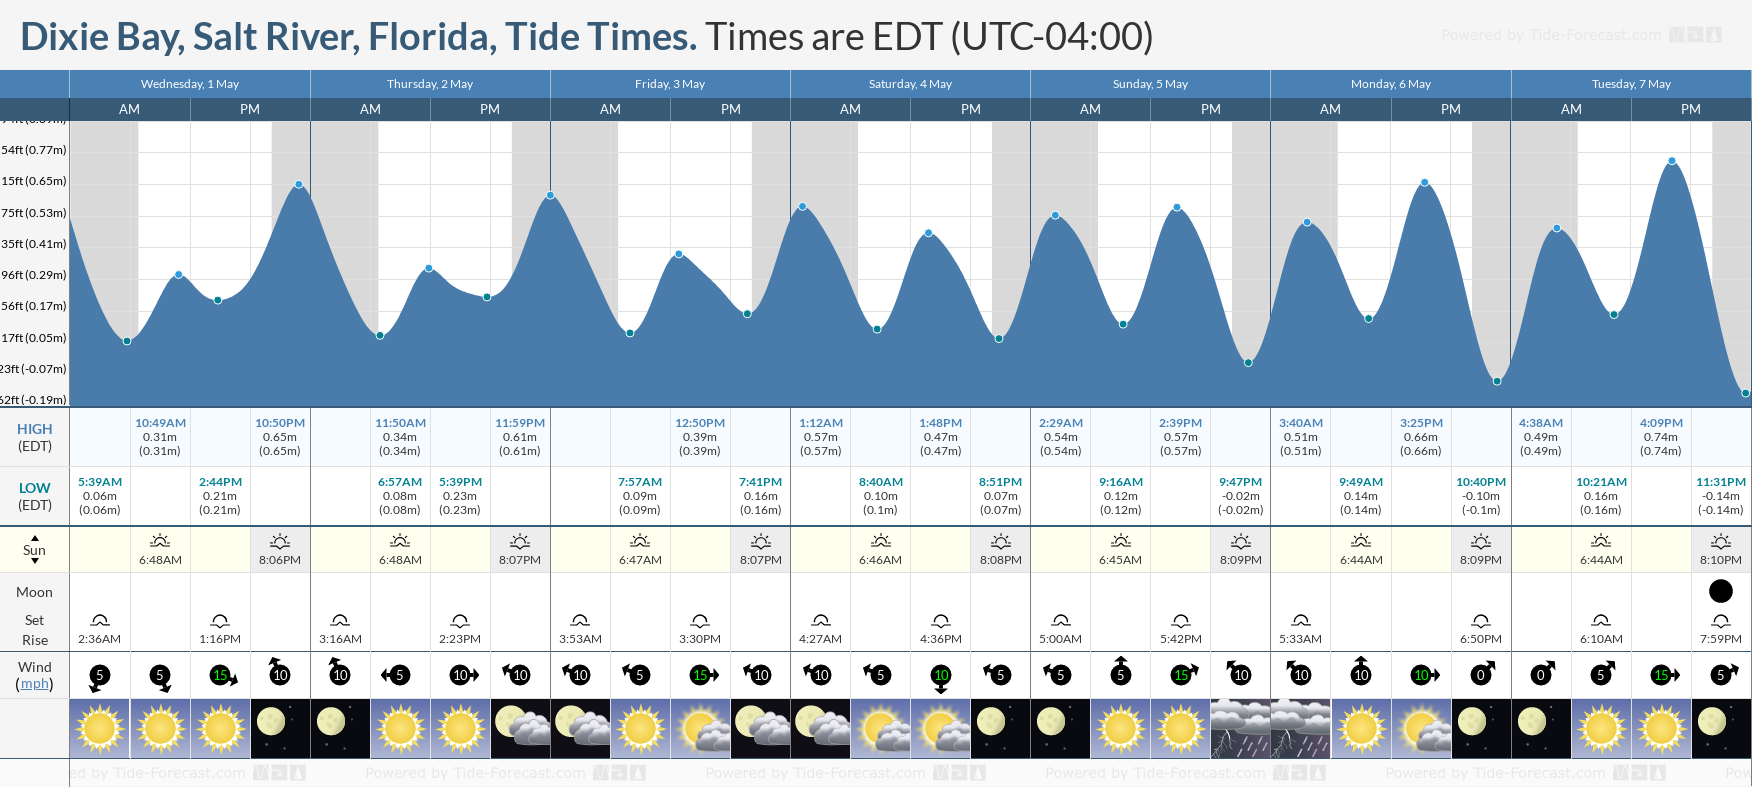 Dixie Bay, Salt River, Florida Tide Chart including high and low tide times for the next 7 days